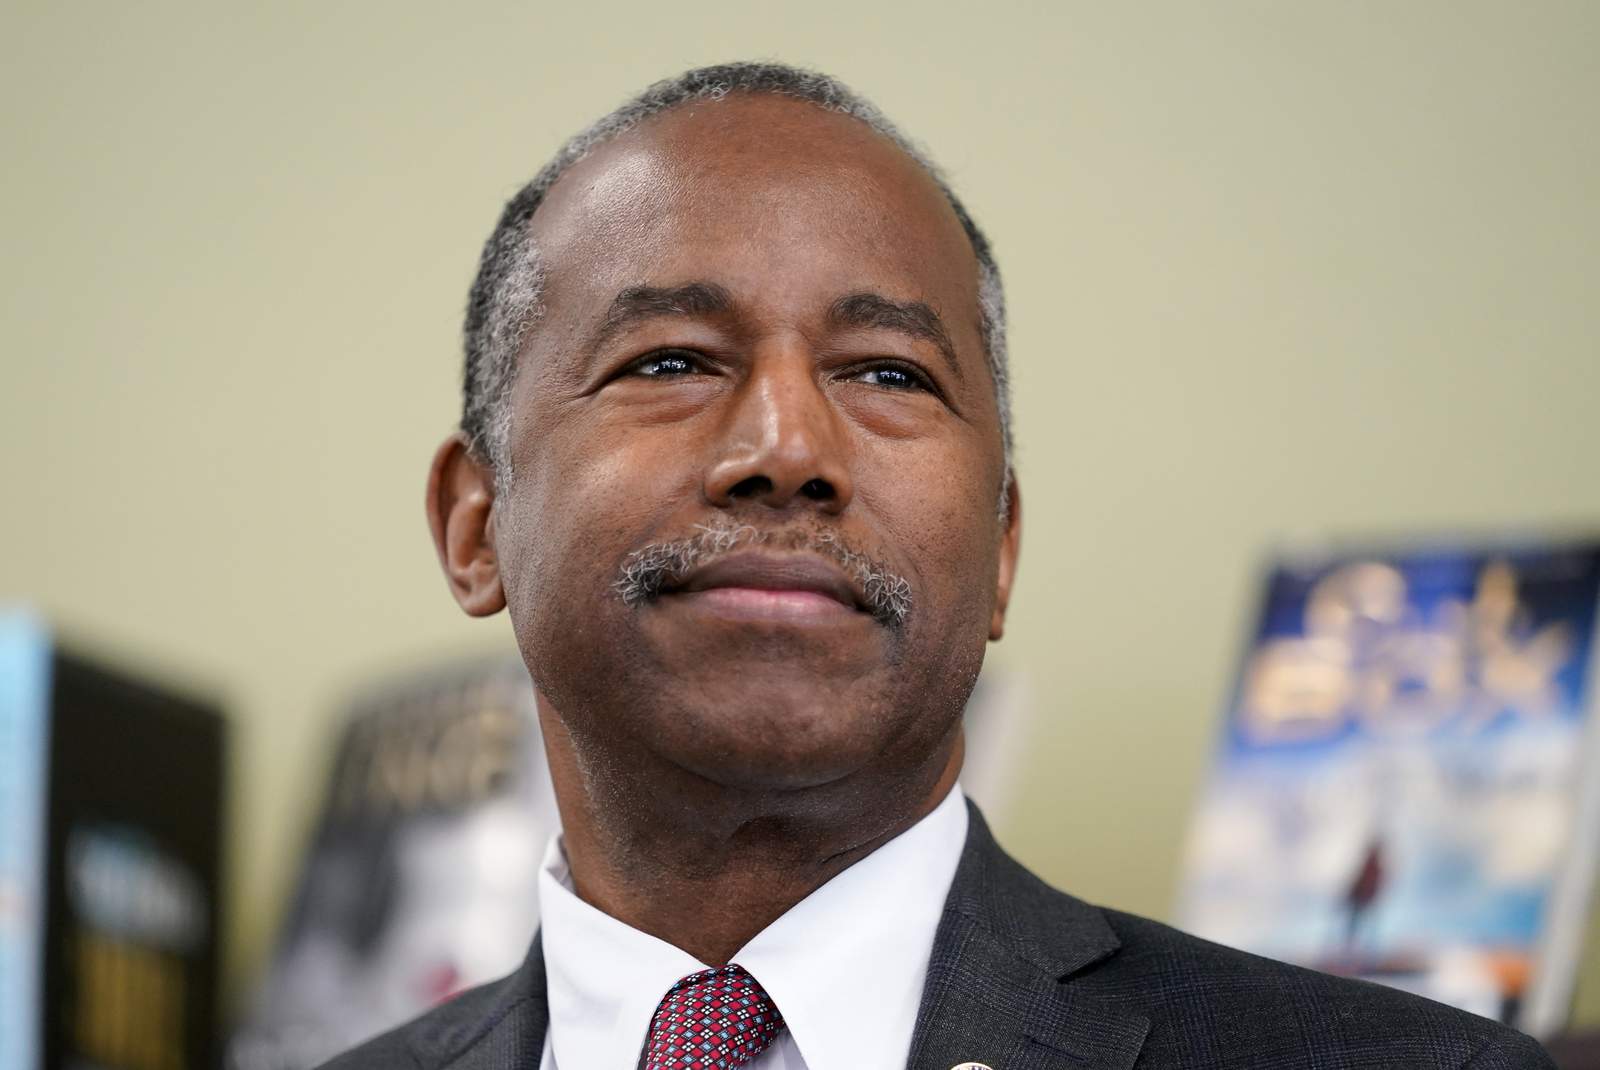 Ben Carson says he’s ‘out of the woods’ after battling COVID-19